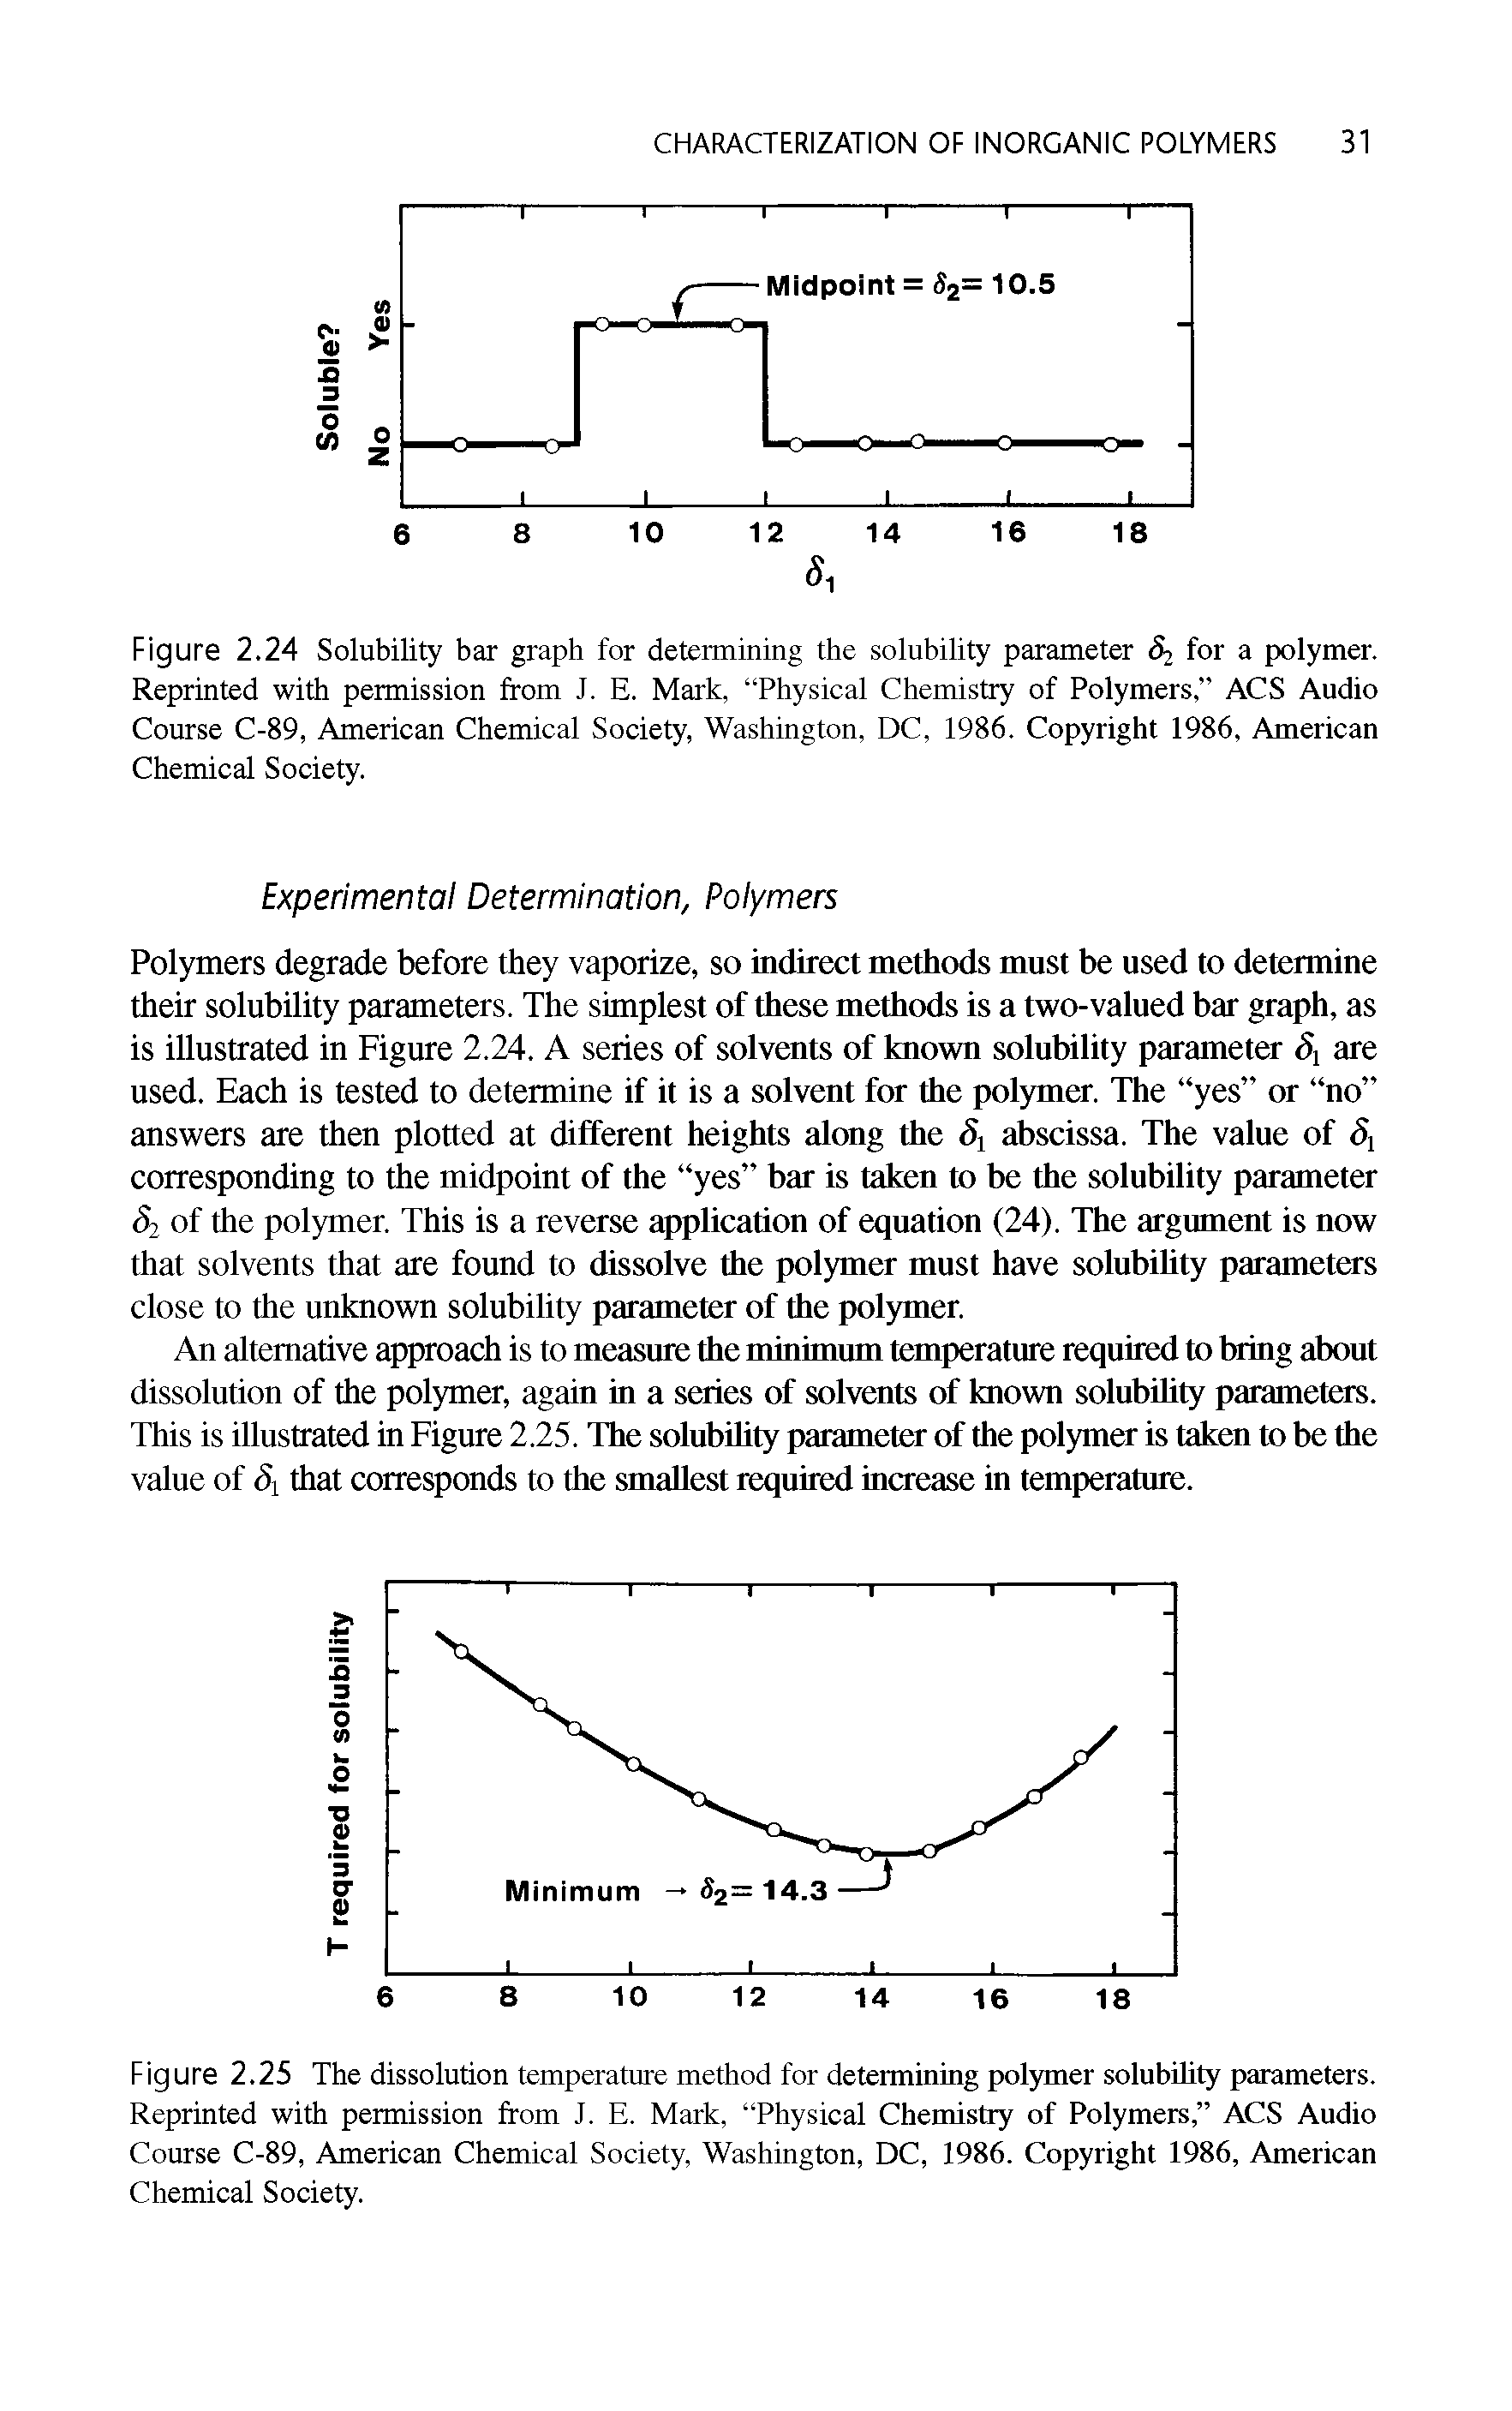 Figure 2.25 The dissolution temperature method for determining polymer solubility parameters. Reprinted with permission from J. E. Mark, Physical Chemistry of Polymers, ACS Audio Course C-89, American Chemical Society, Washington, DC, 1986. Copyright 1986, American Chemical Society.